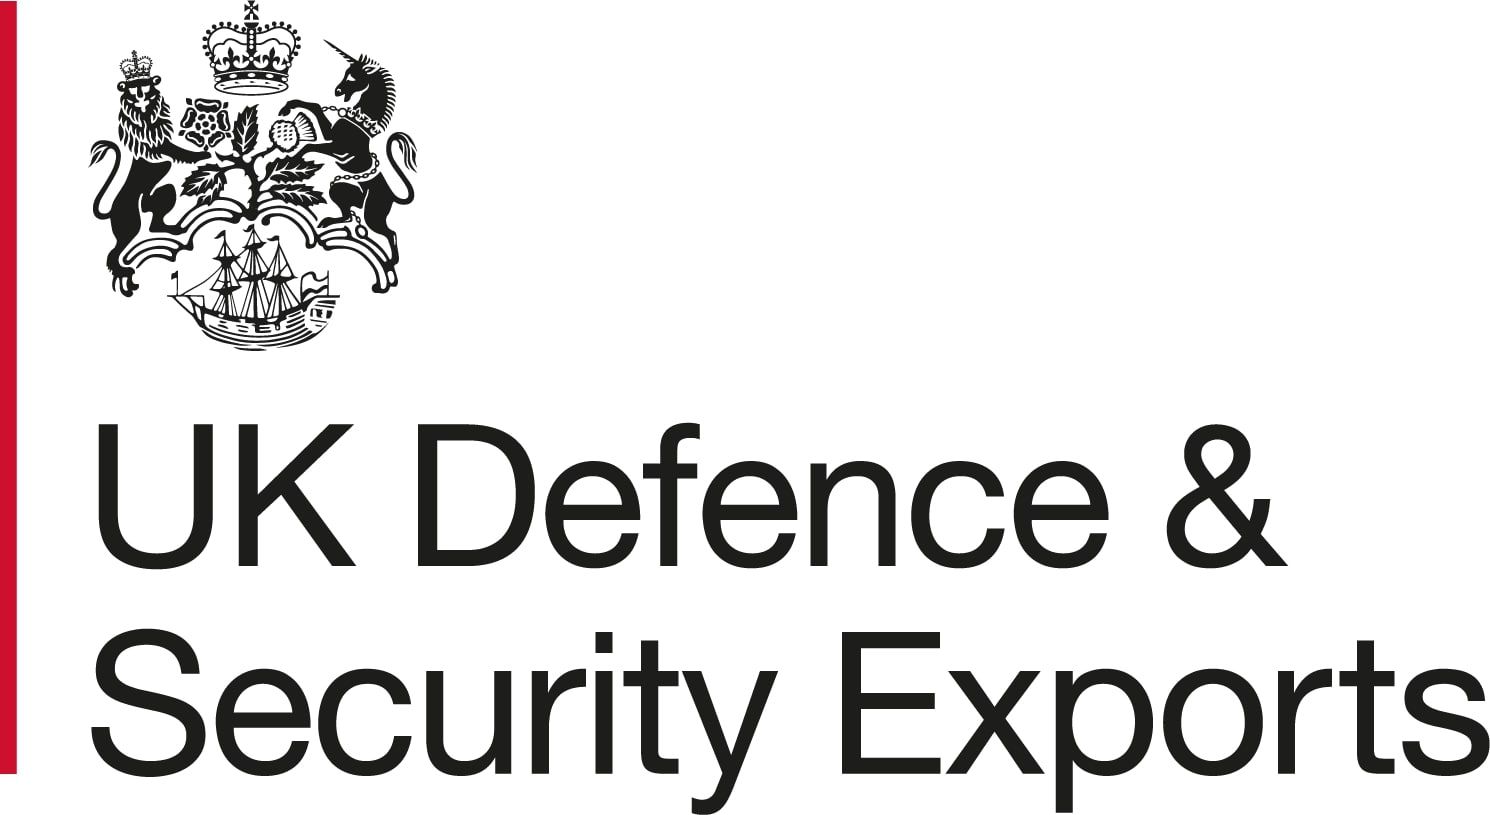 UK Defence & Security Exports